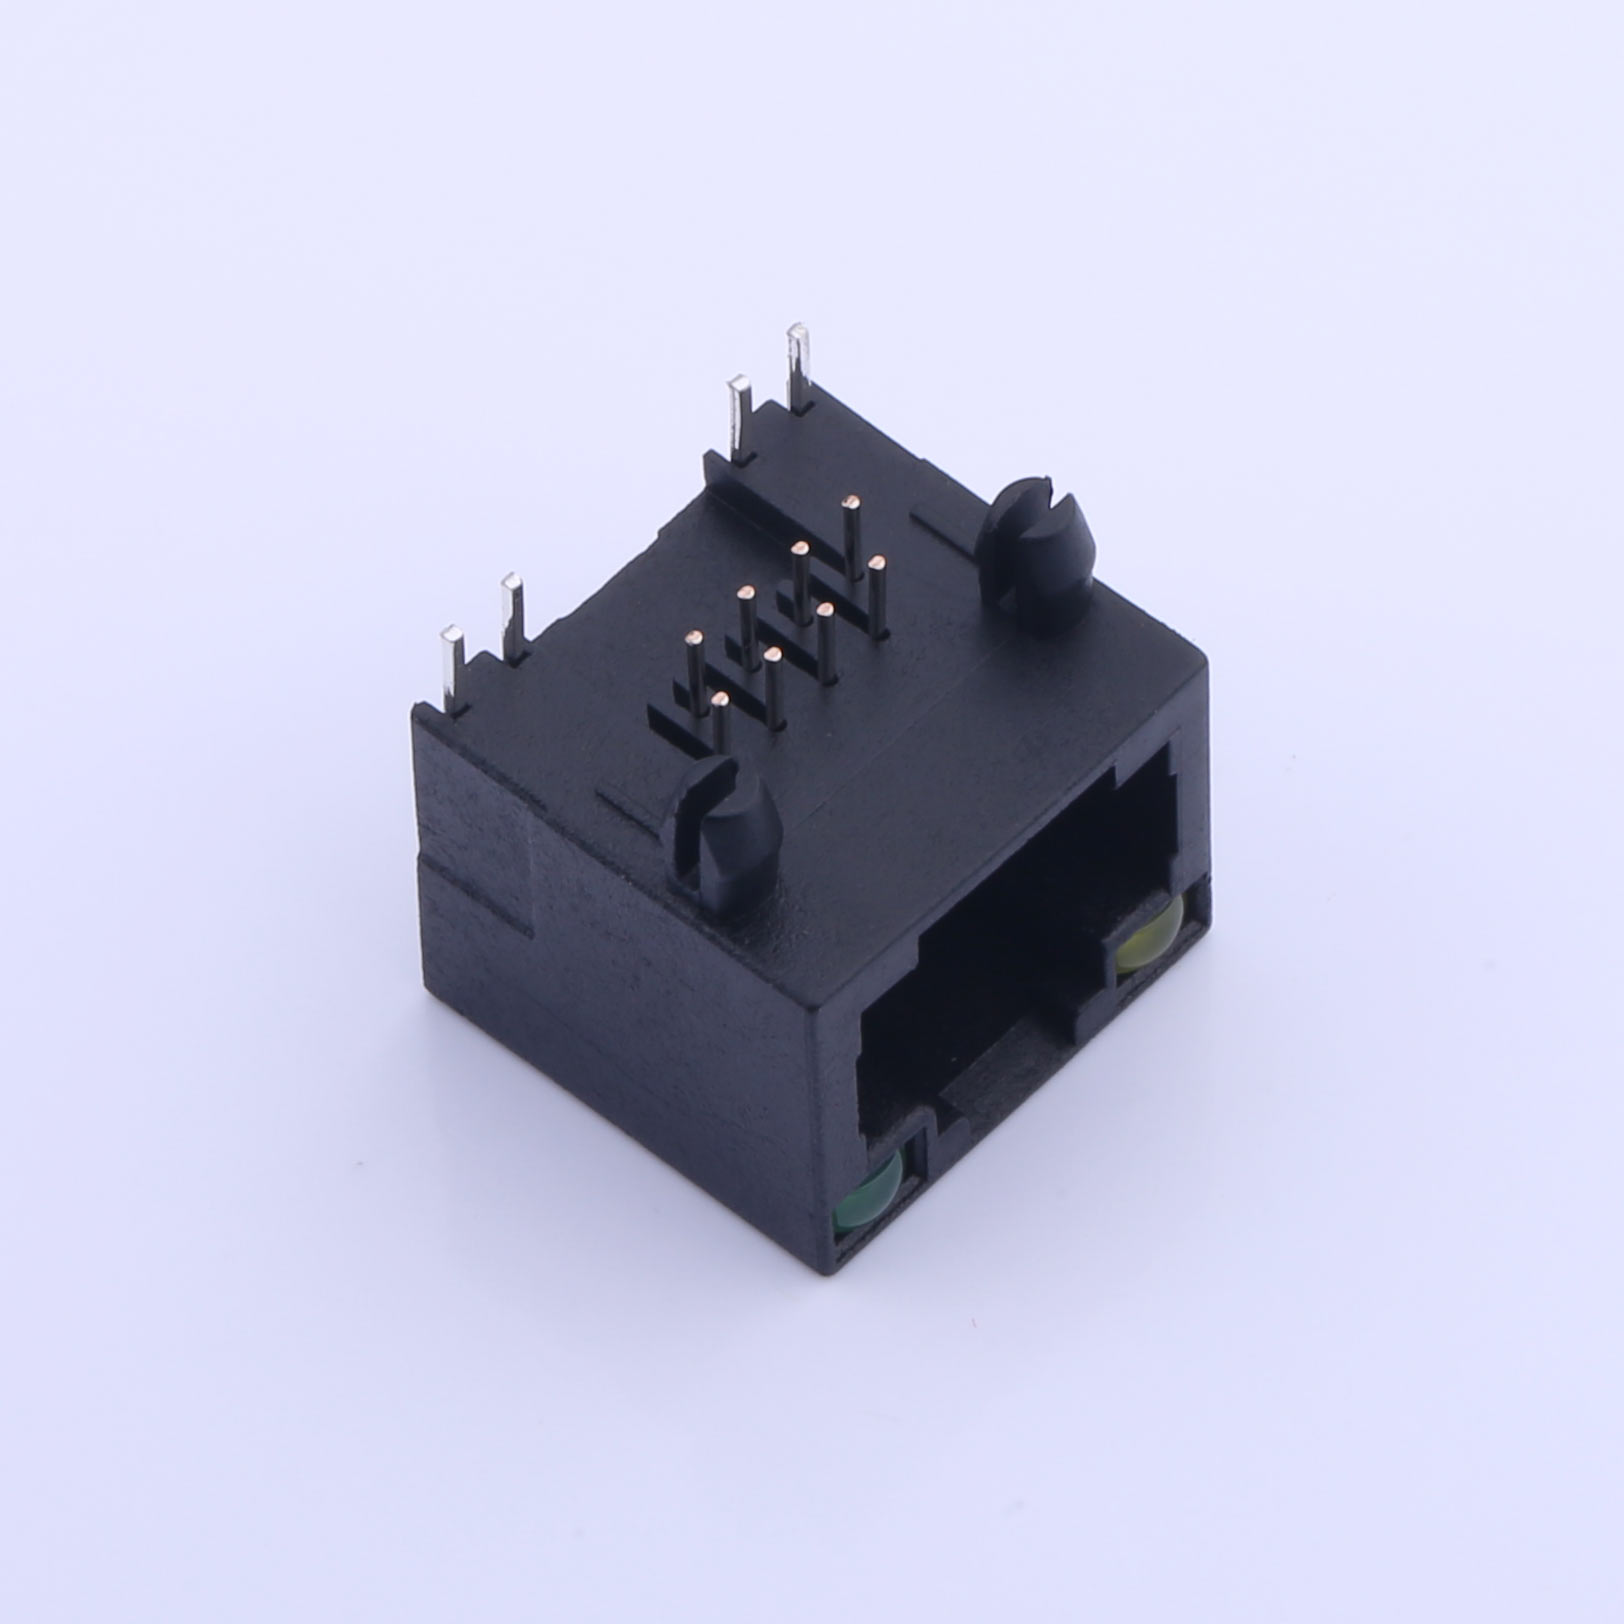 Kinghelm Network interface 1x1 single port 8P8C RJ11 female Ethernet connector with LED indicator